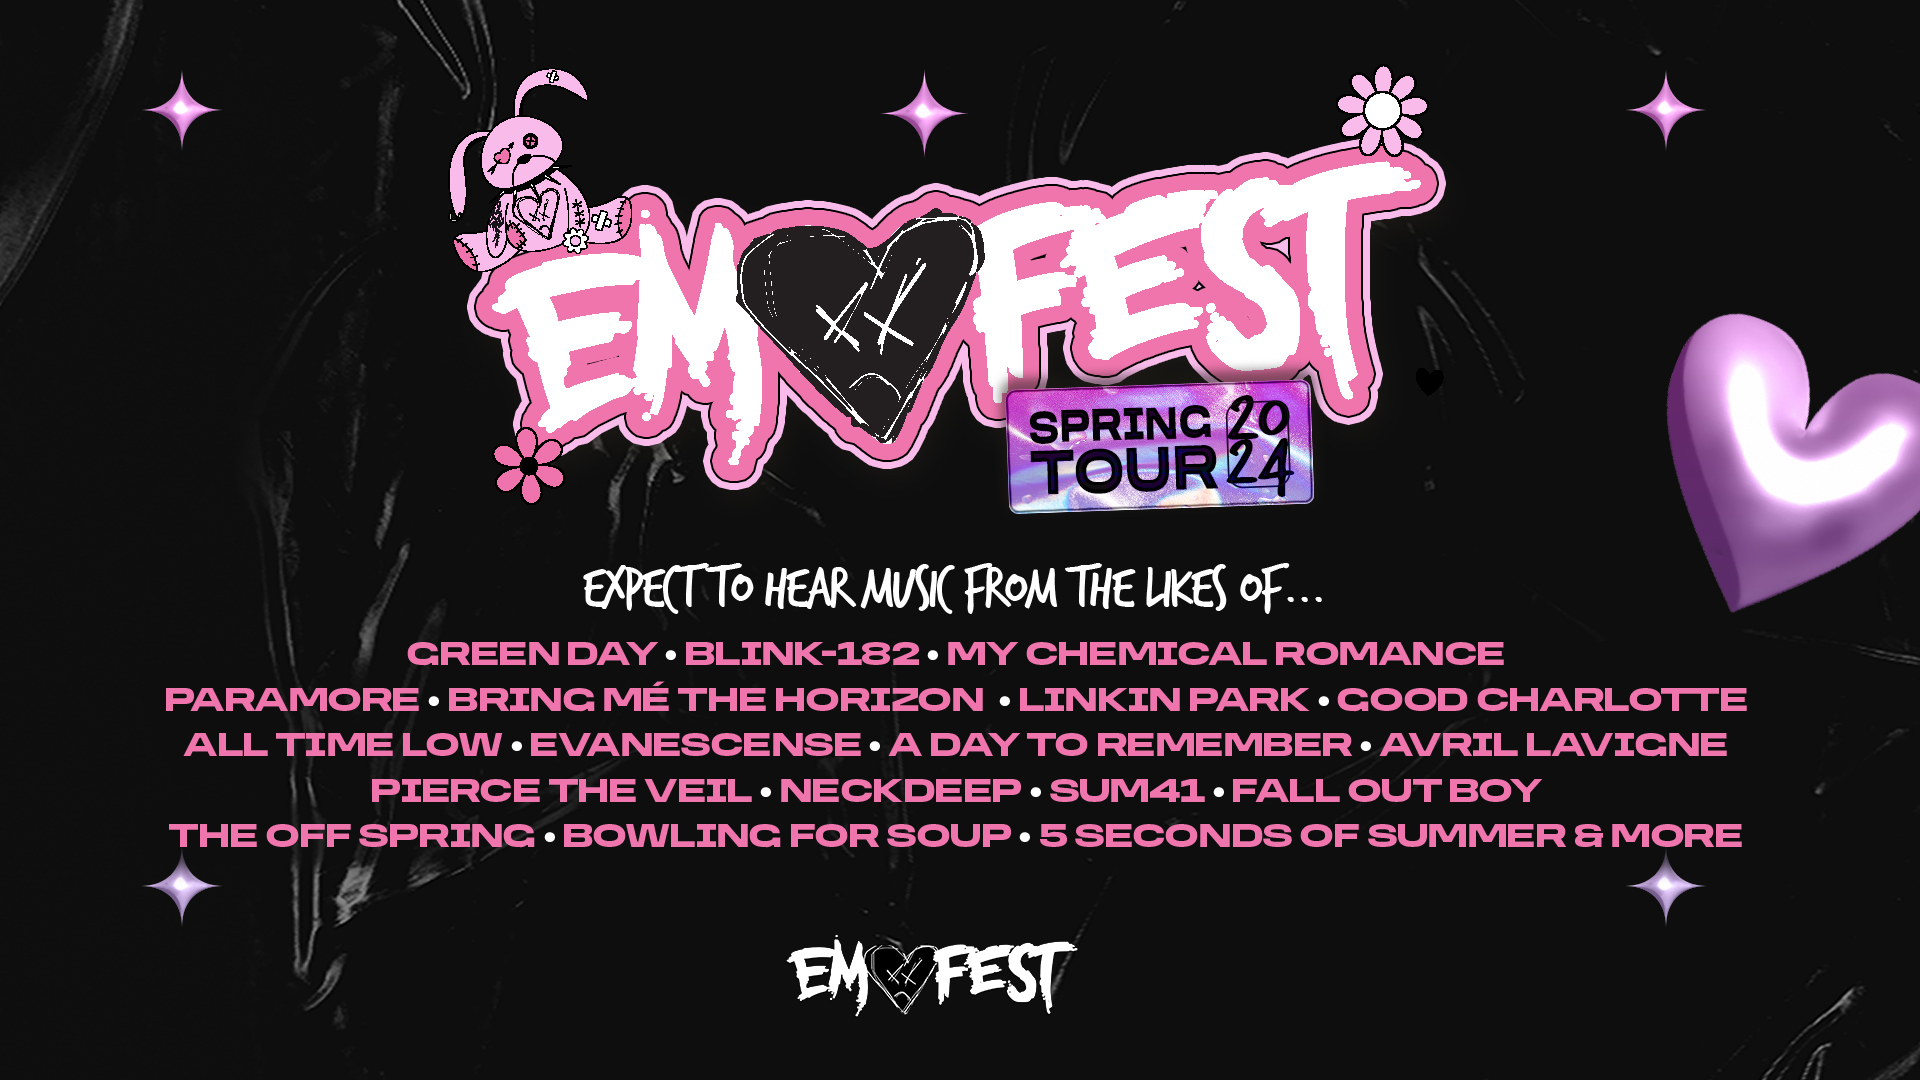 🚨 SOLD OUT! 💀🖤 The Emo Fest 🖤💀 BACK IN SHREWSBURY!